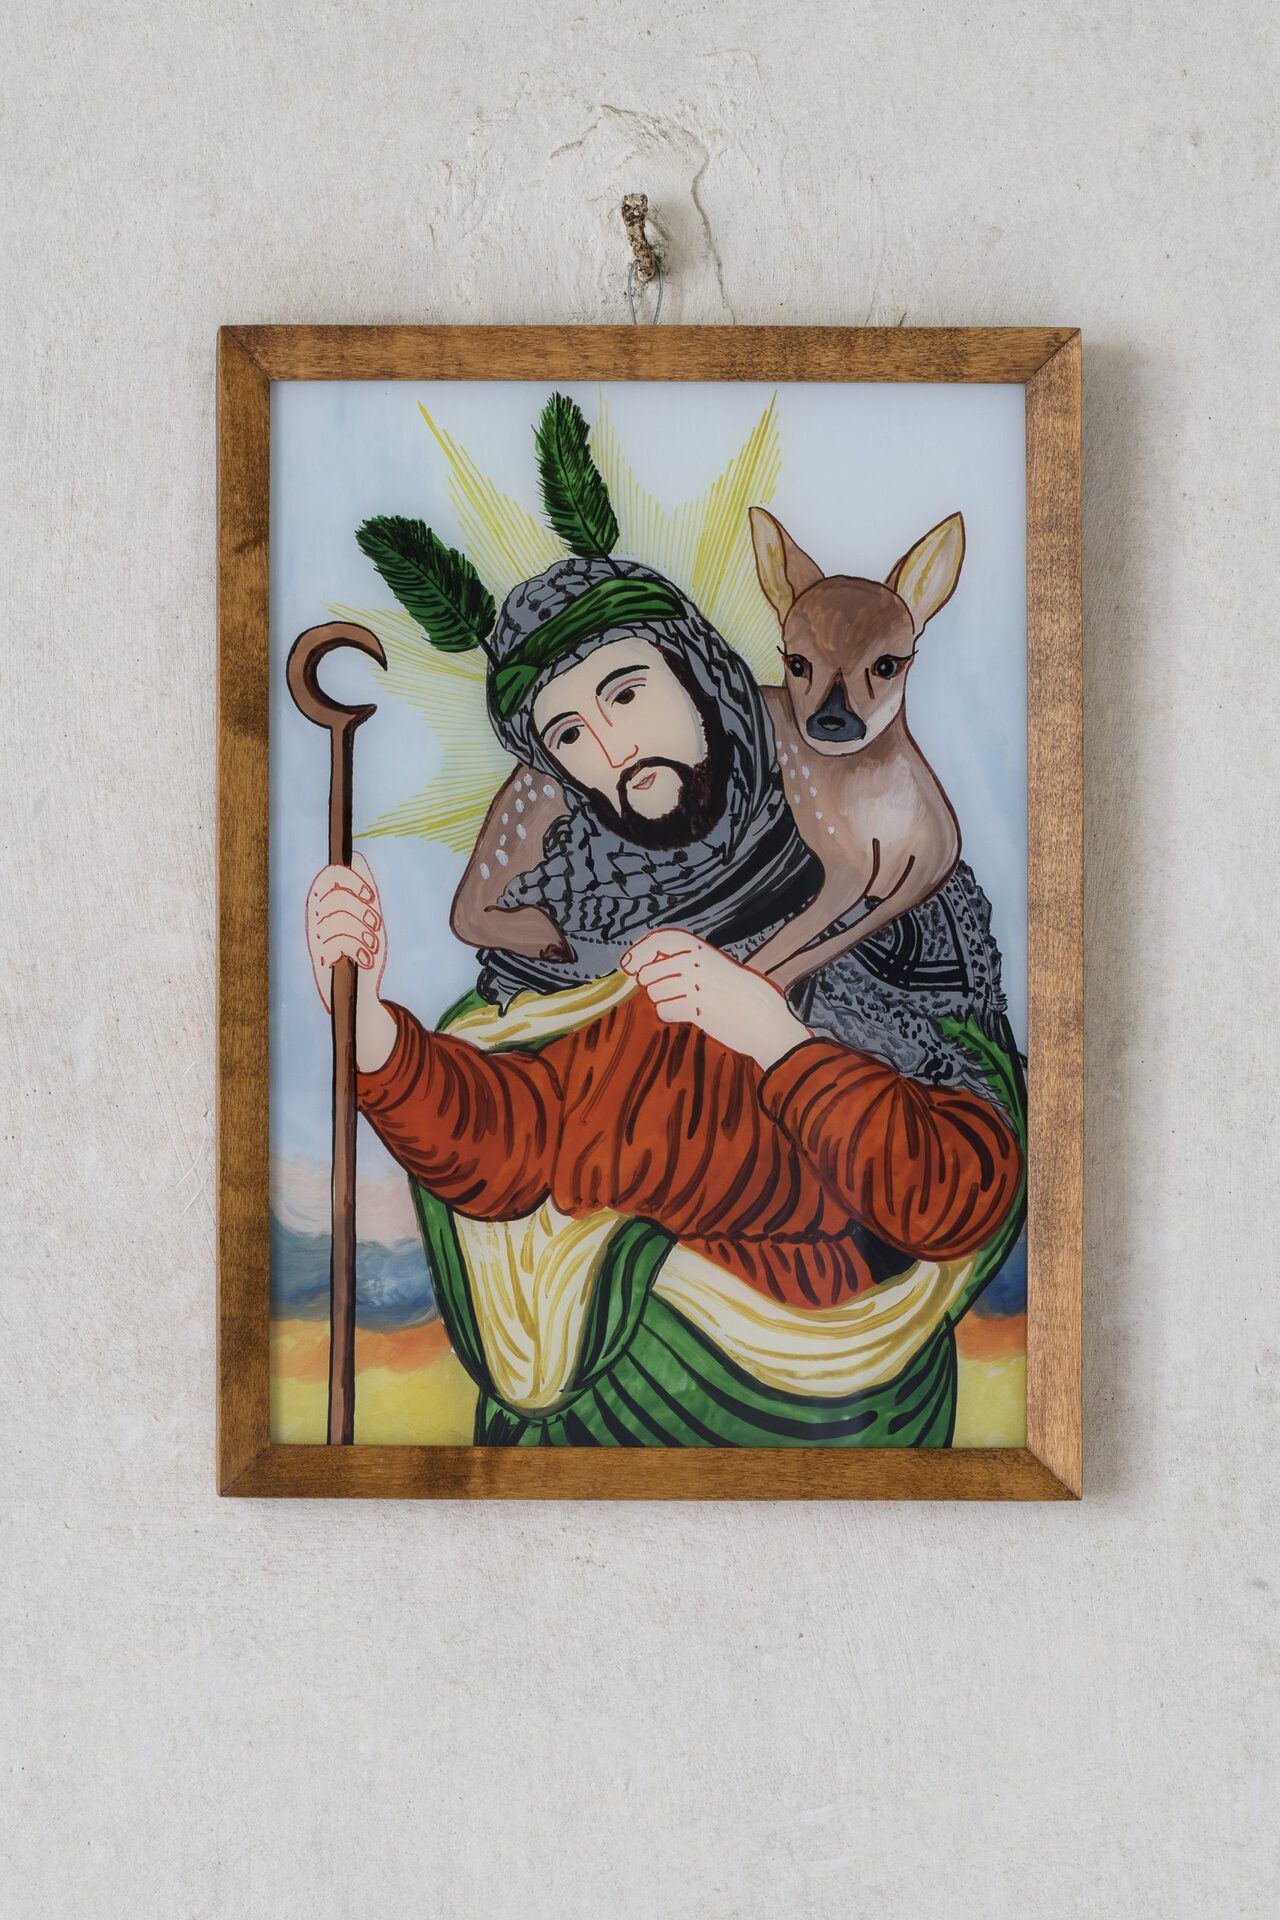 Slavs and Tatars, Communion (The Guarantor of the Deer), 2021 reverse painting on glass with acrylic and synthetic paint 44 × 32 cm courtesy of the artists and Raster Gallery, Warsaw